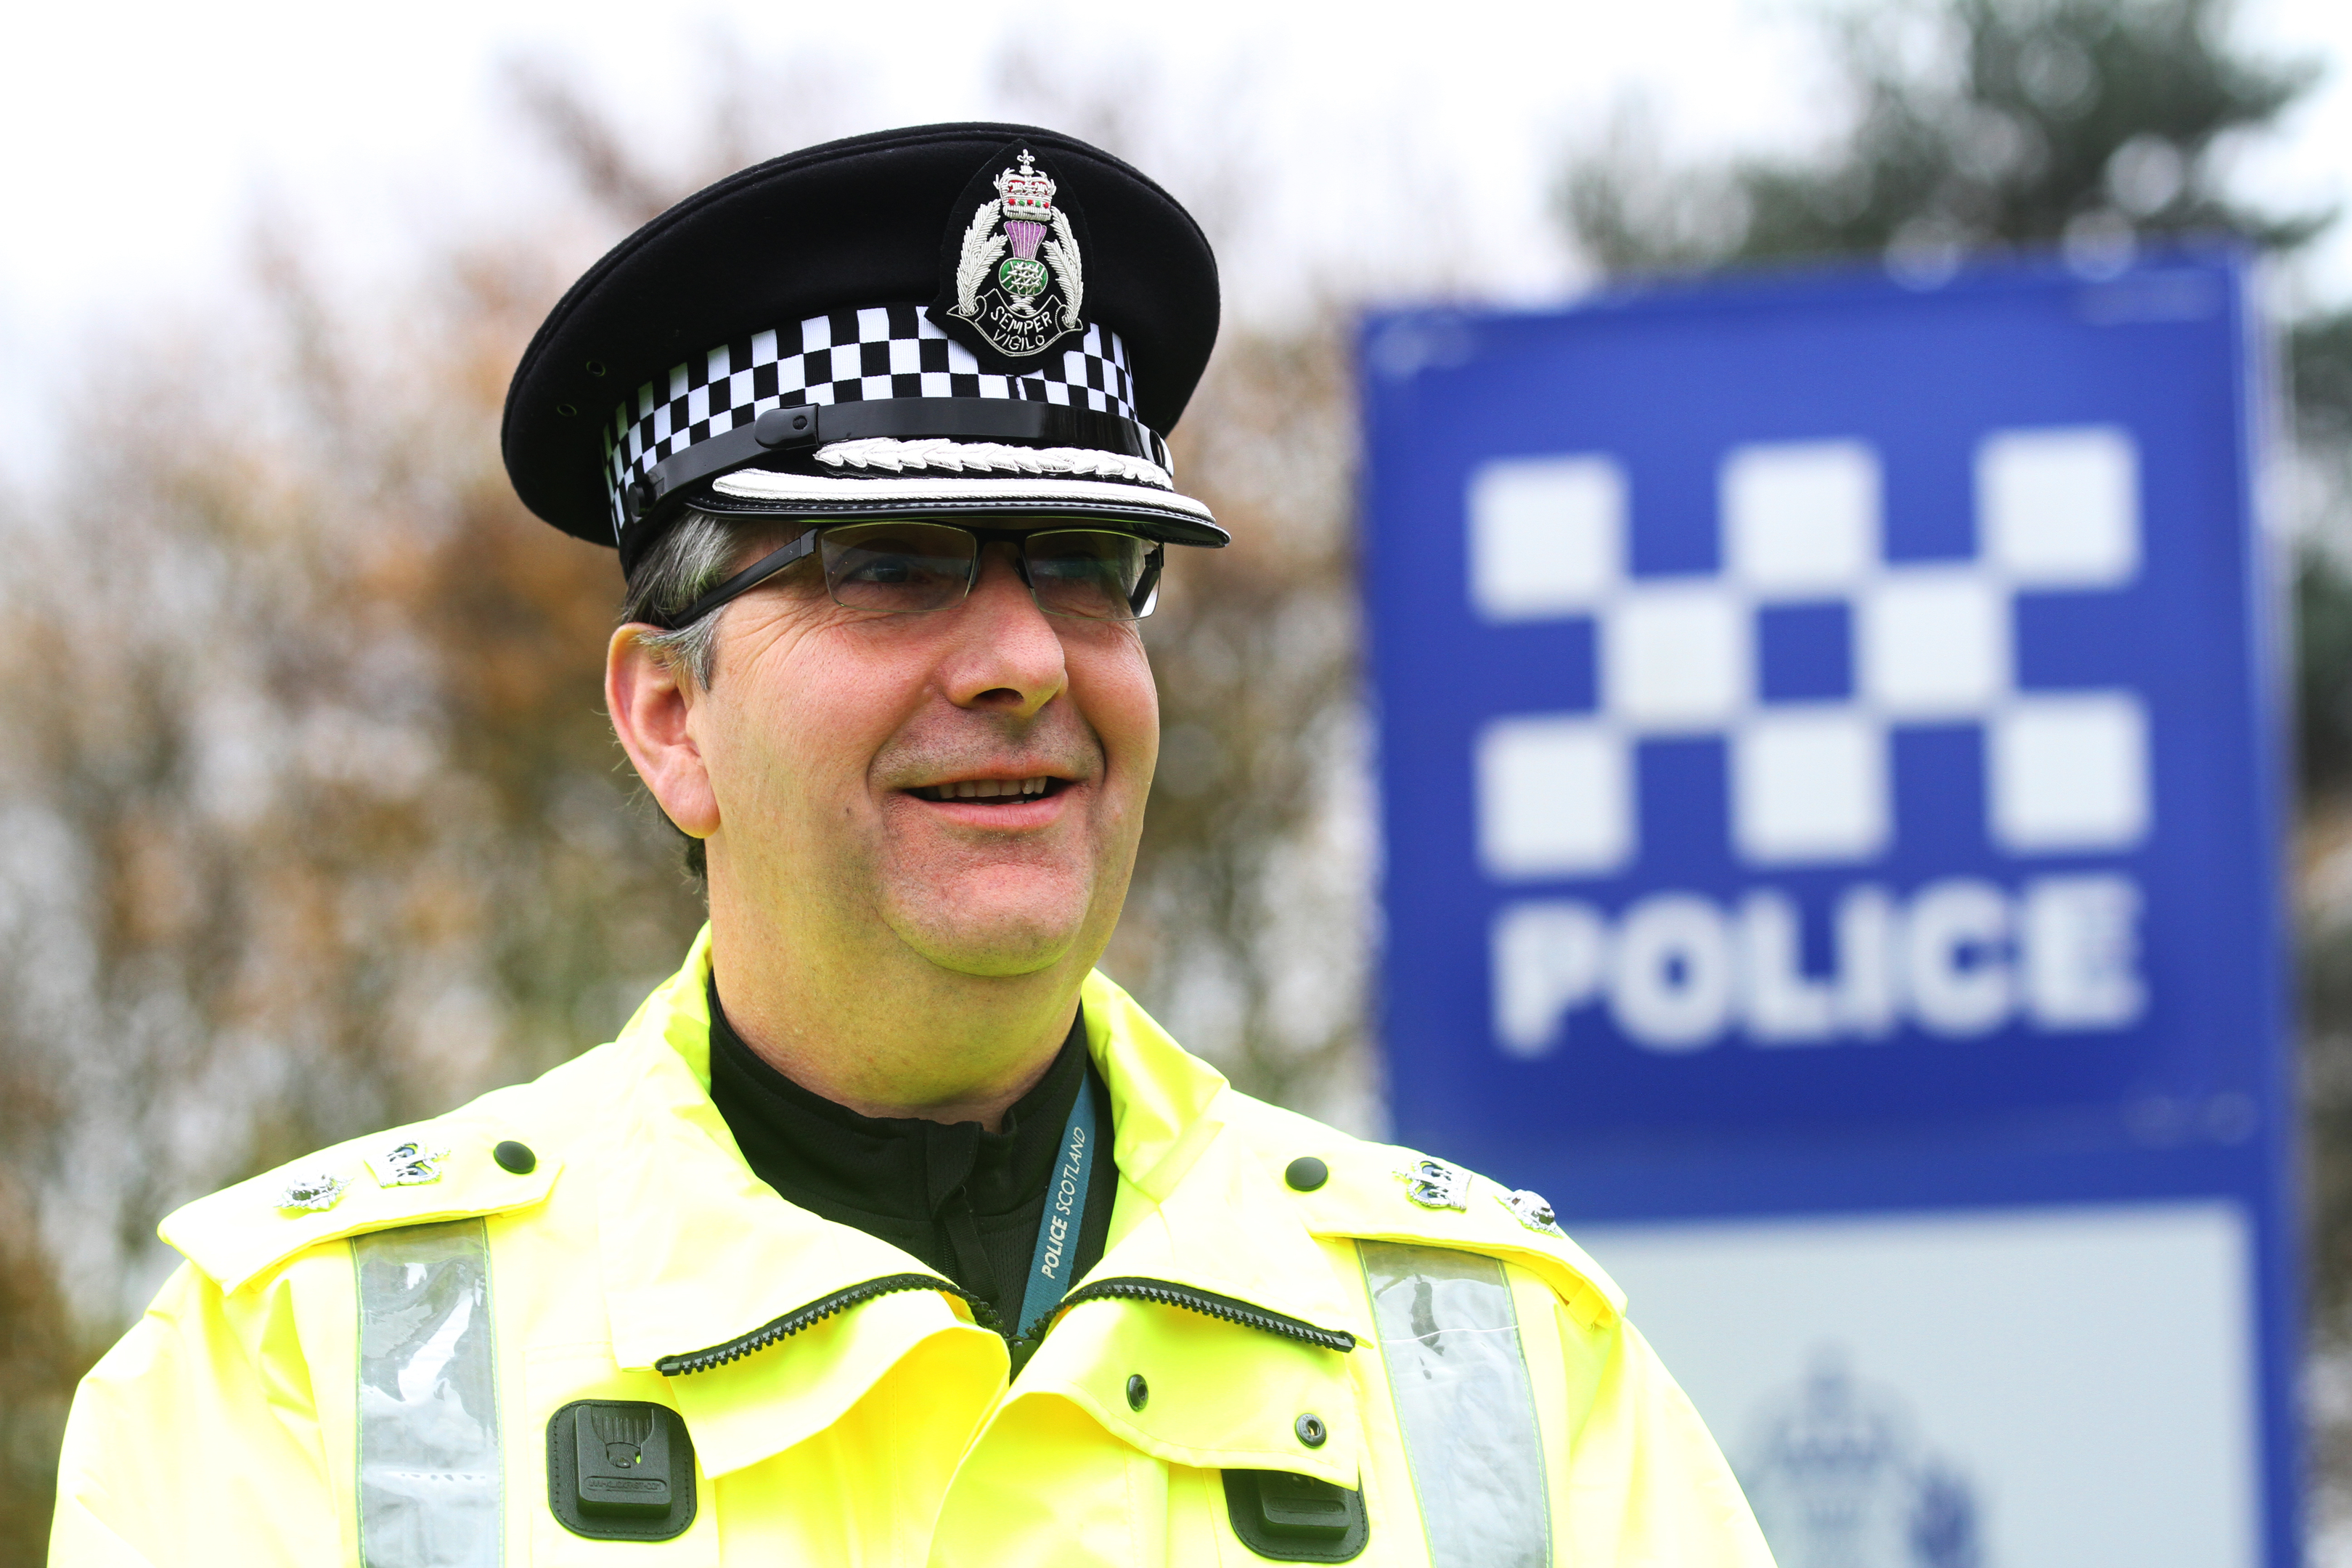 Chief Superintendent Colin Gall reflected on the figures as he retires from the force.